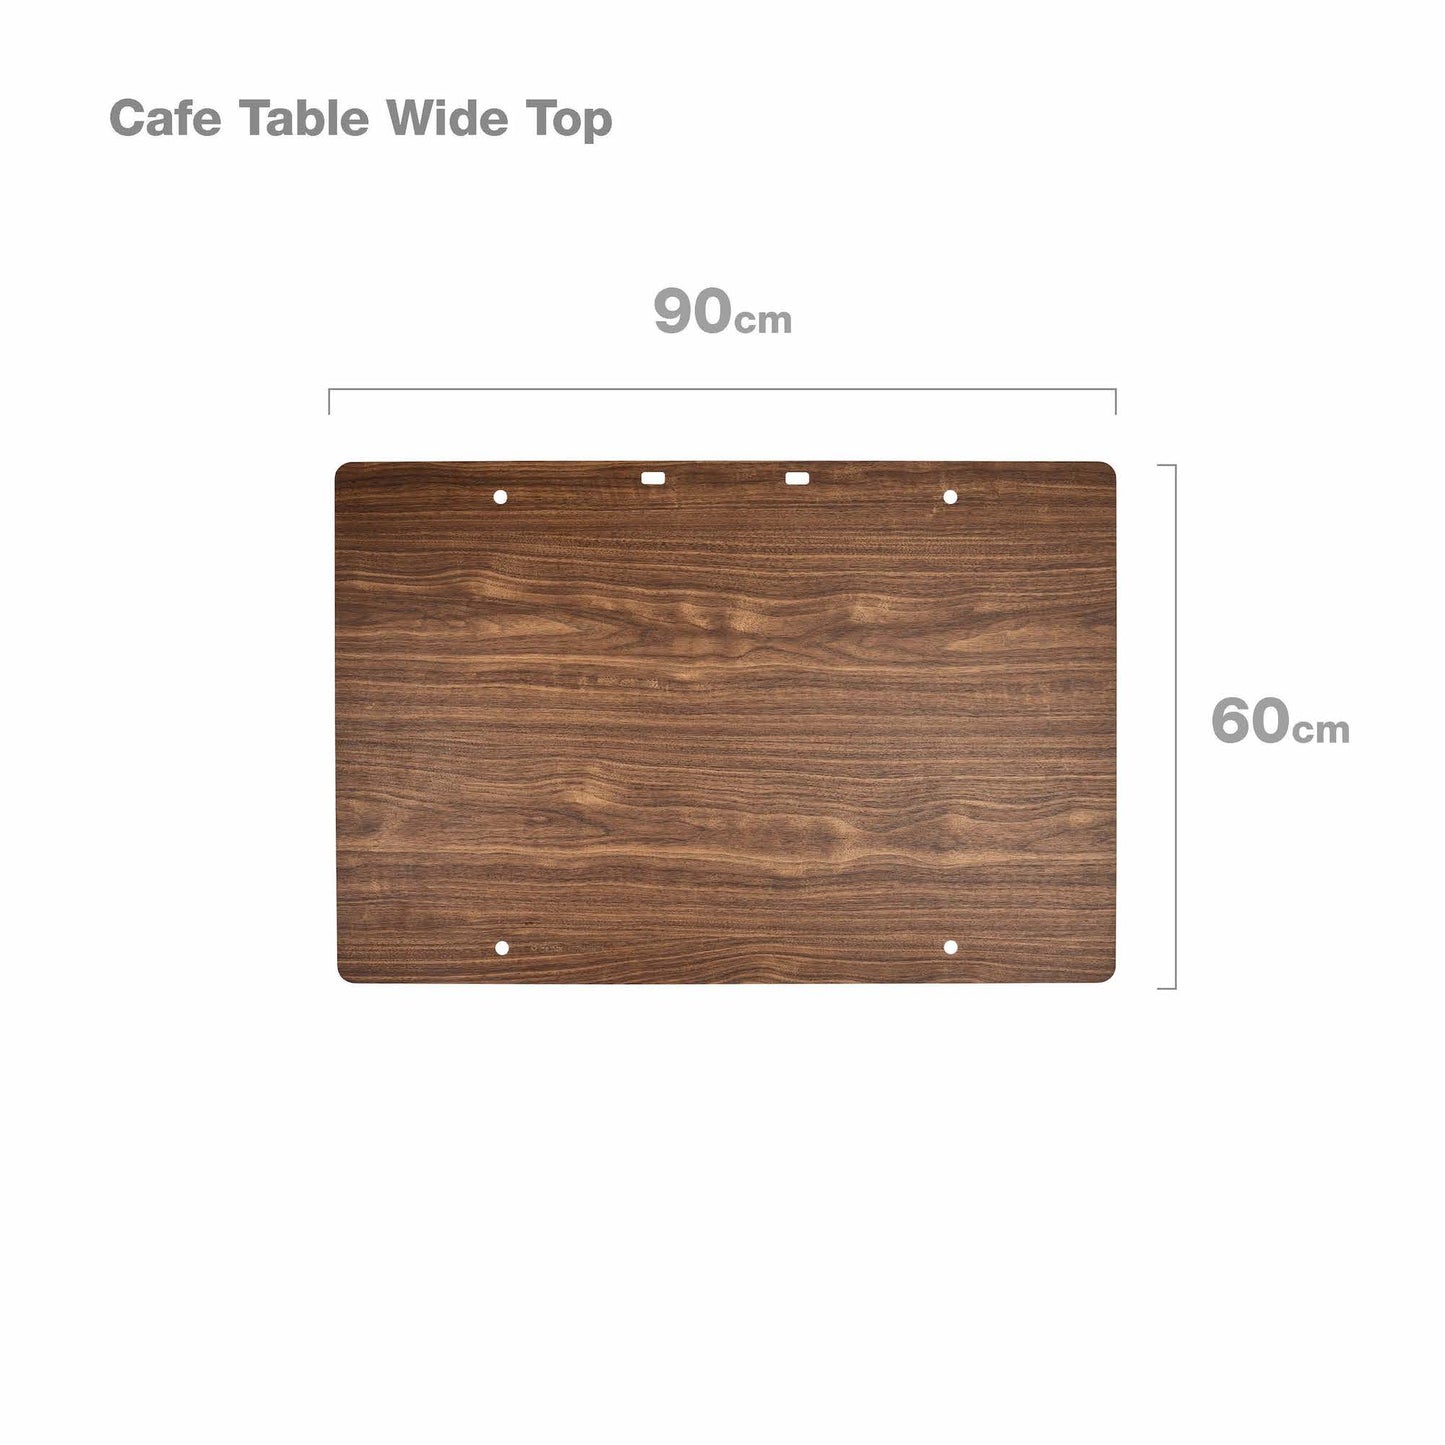 Cafe Table Home Wide Top - Walnut